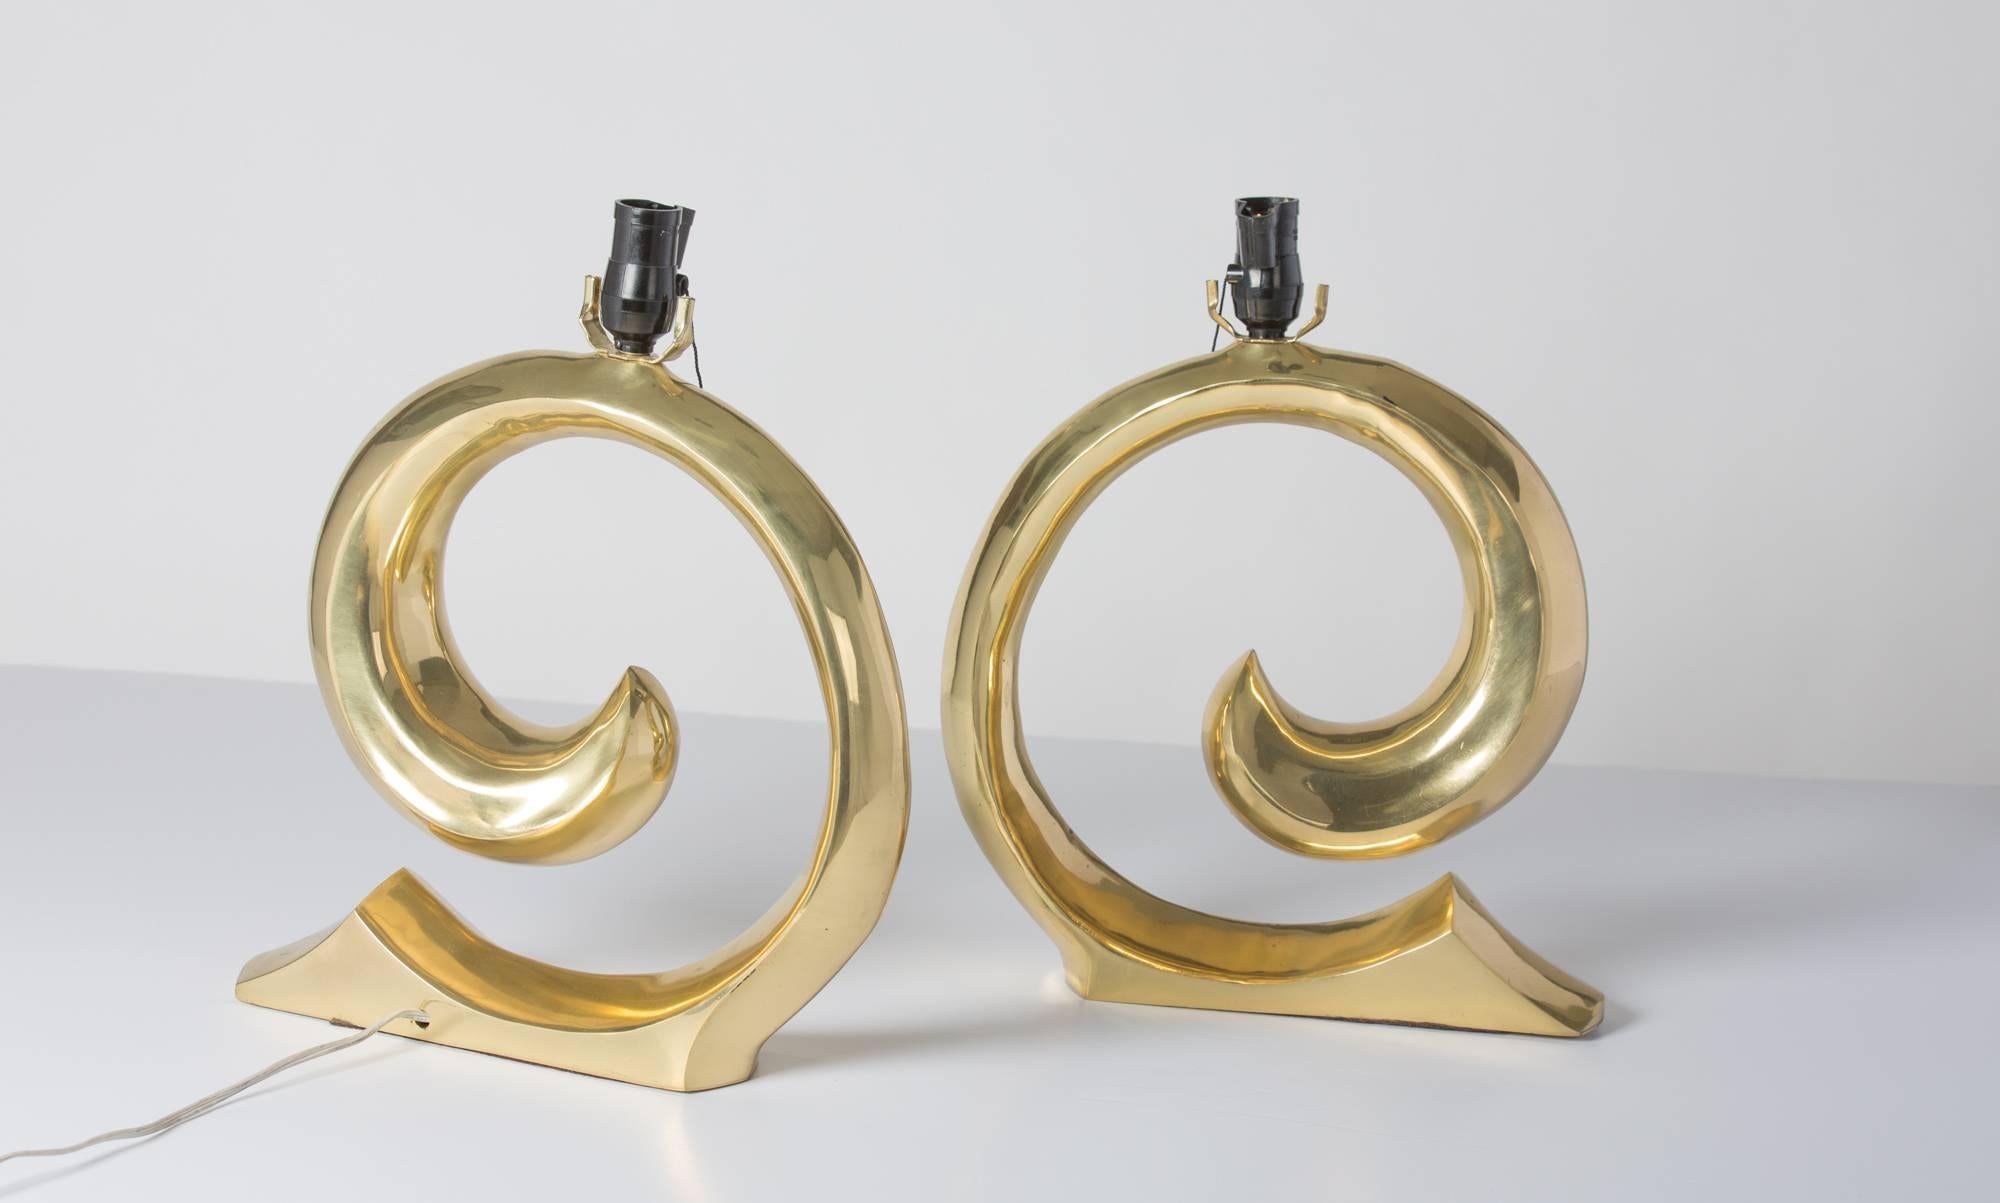 Signature brass table lamps by Pierre Cardin
with original double sockets.